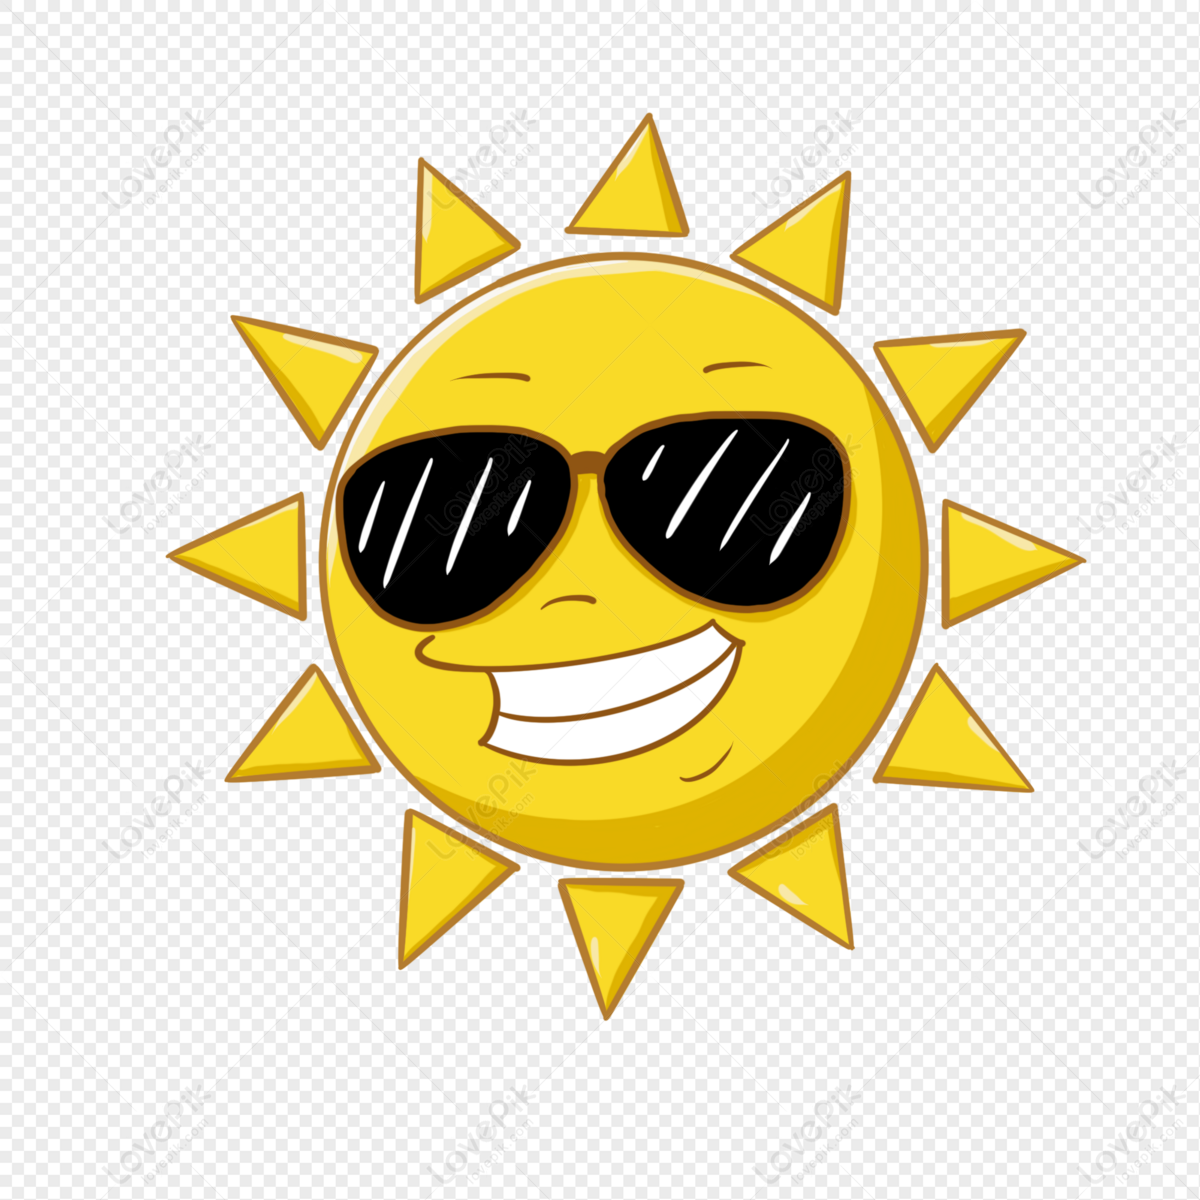 Sun PNG Image And Clipart Image For Free Download - Lovepik ...